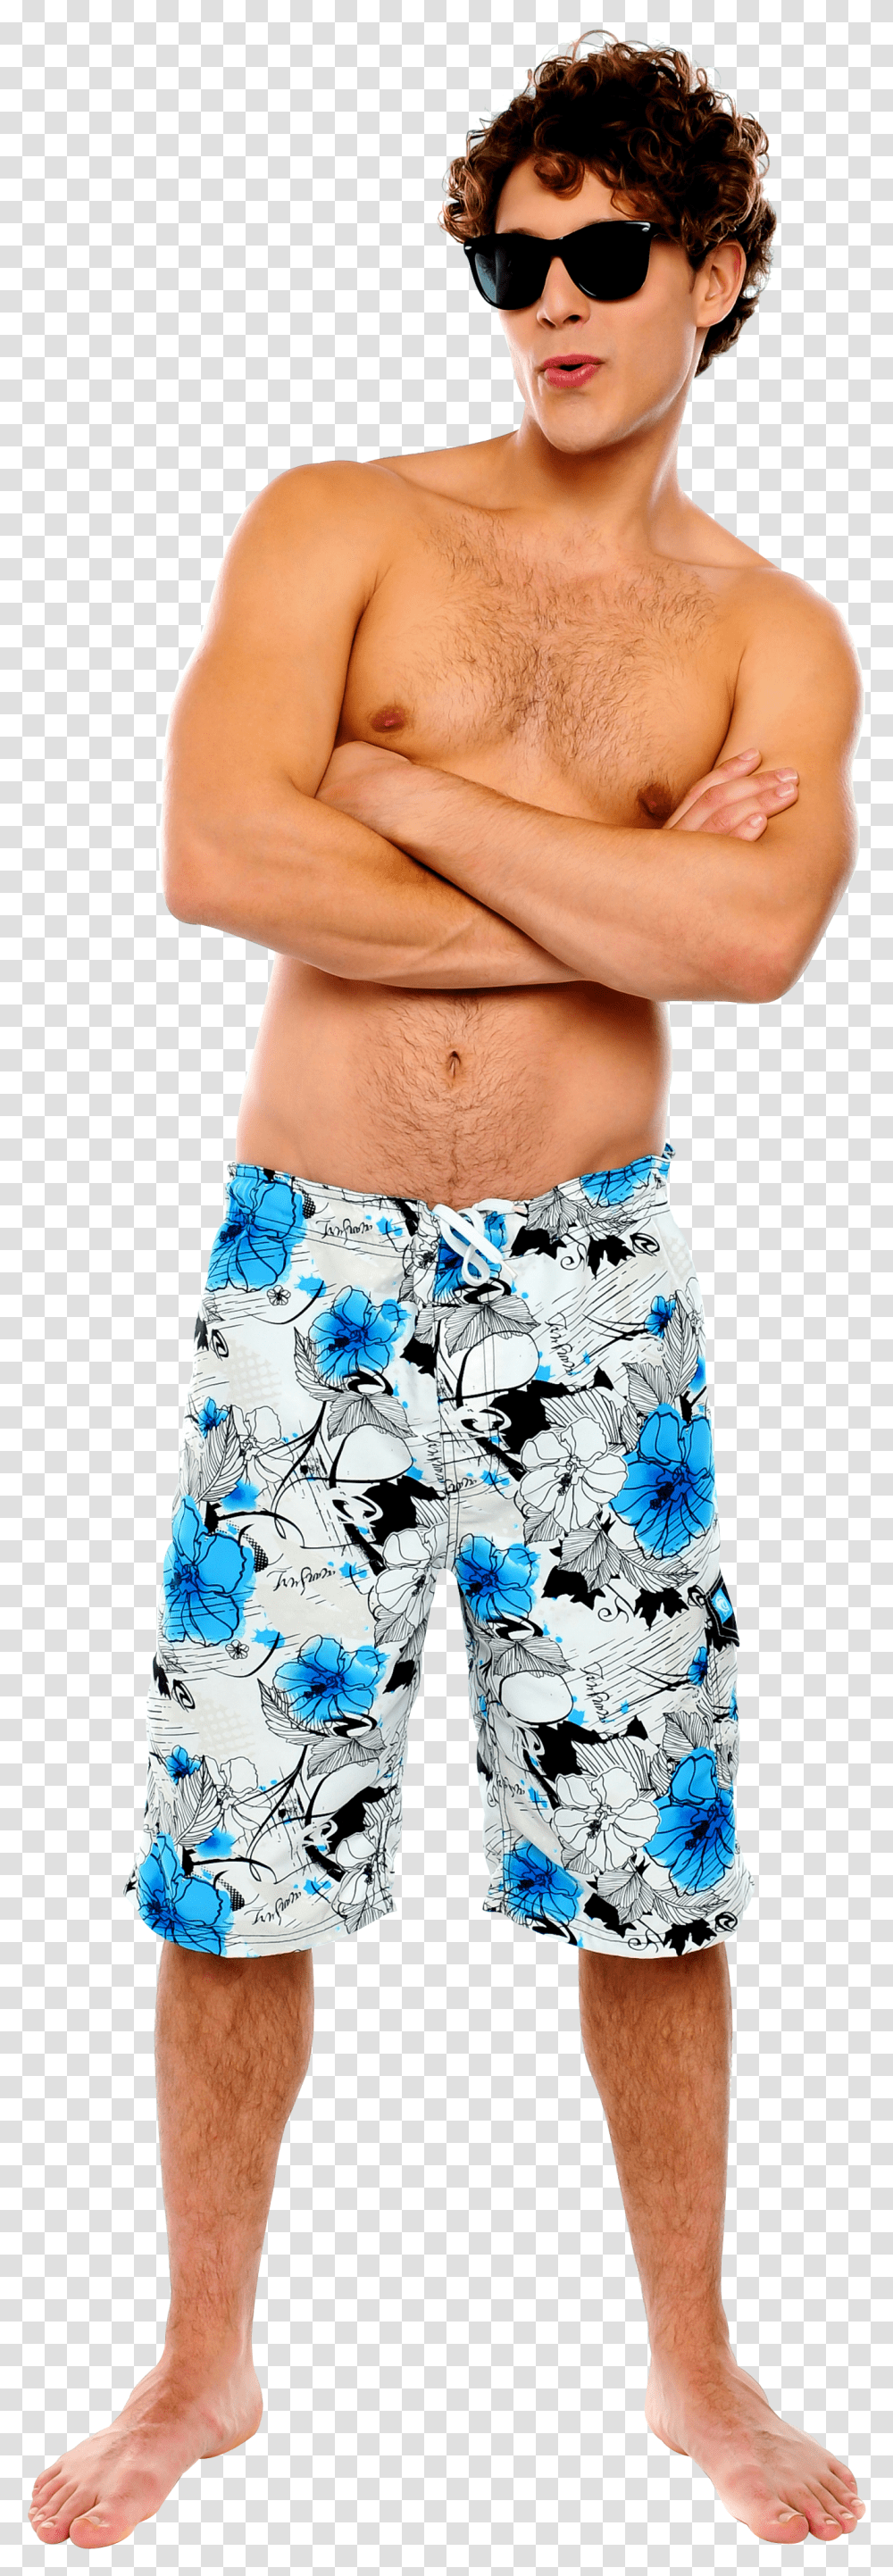 Cool Guy Image Casual Guy Transparent Png